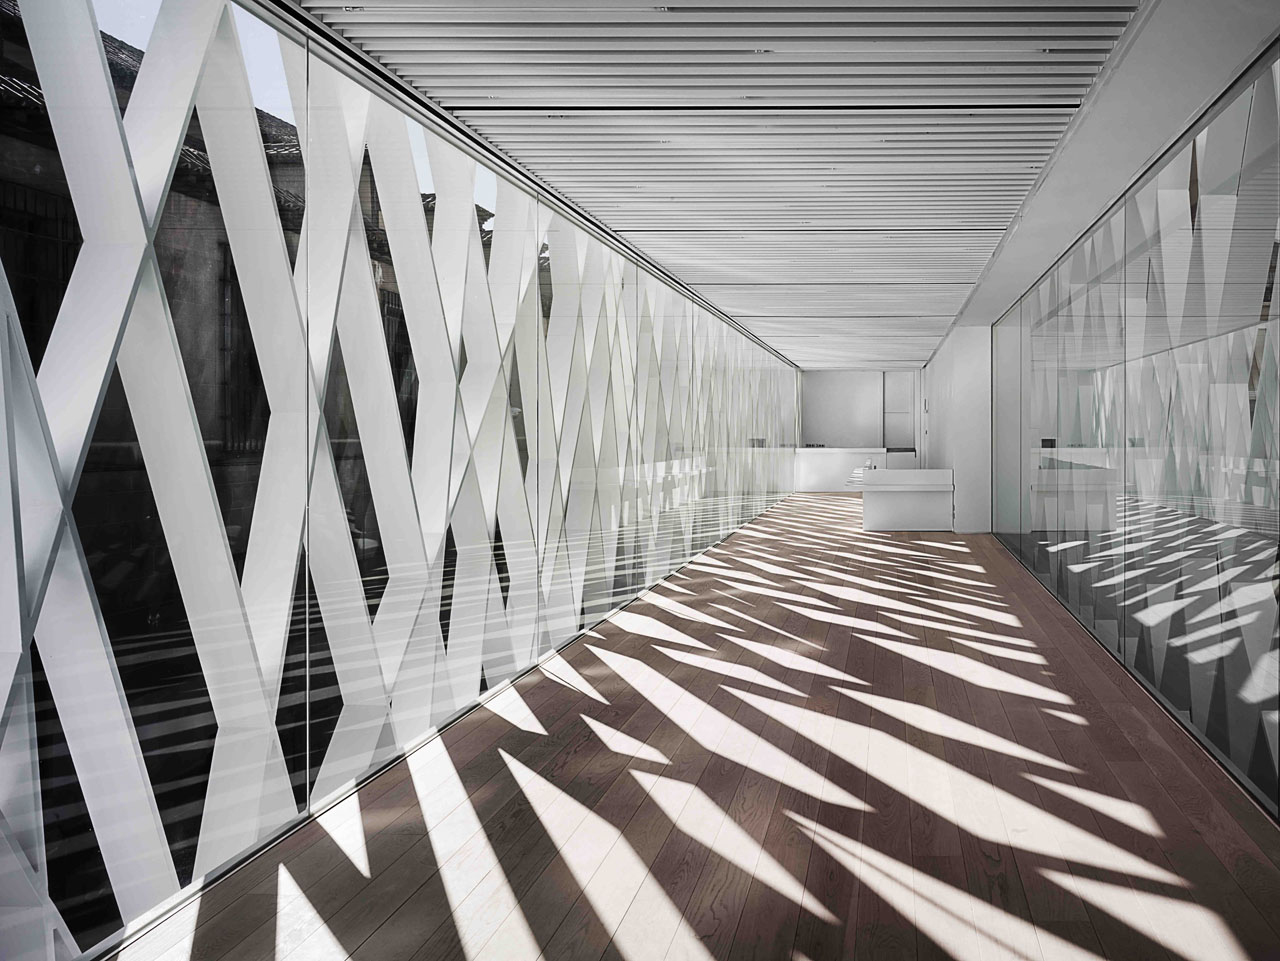 The exterior of Museo ABC in Madrid, Spain by Aranguren y Gallegos Architecture